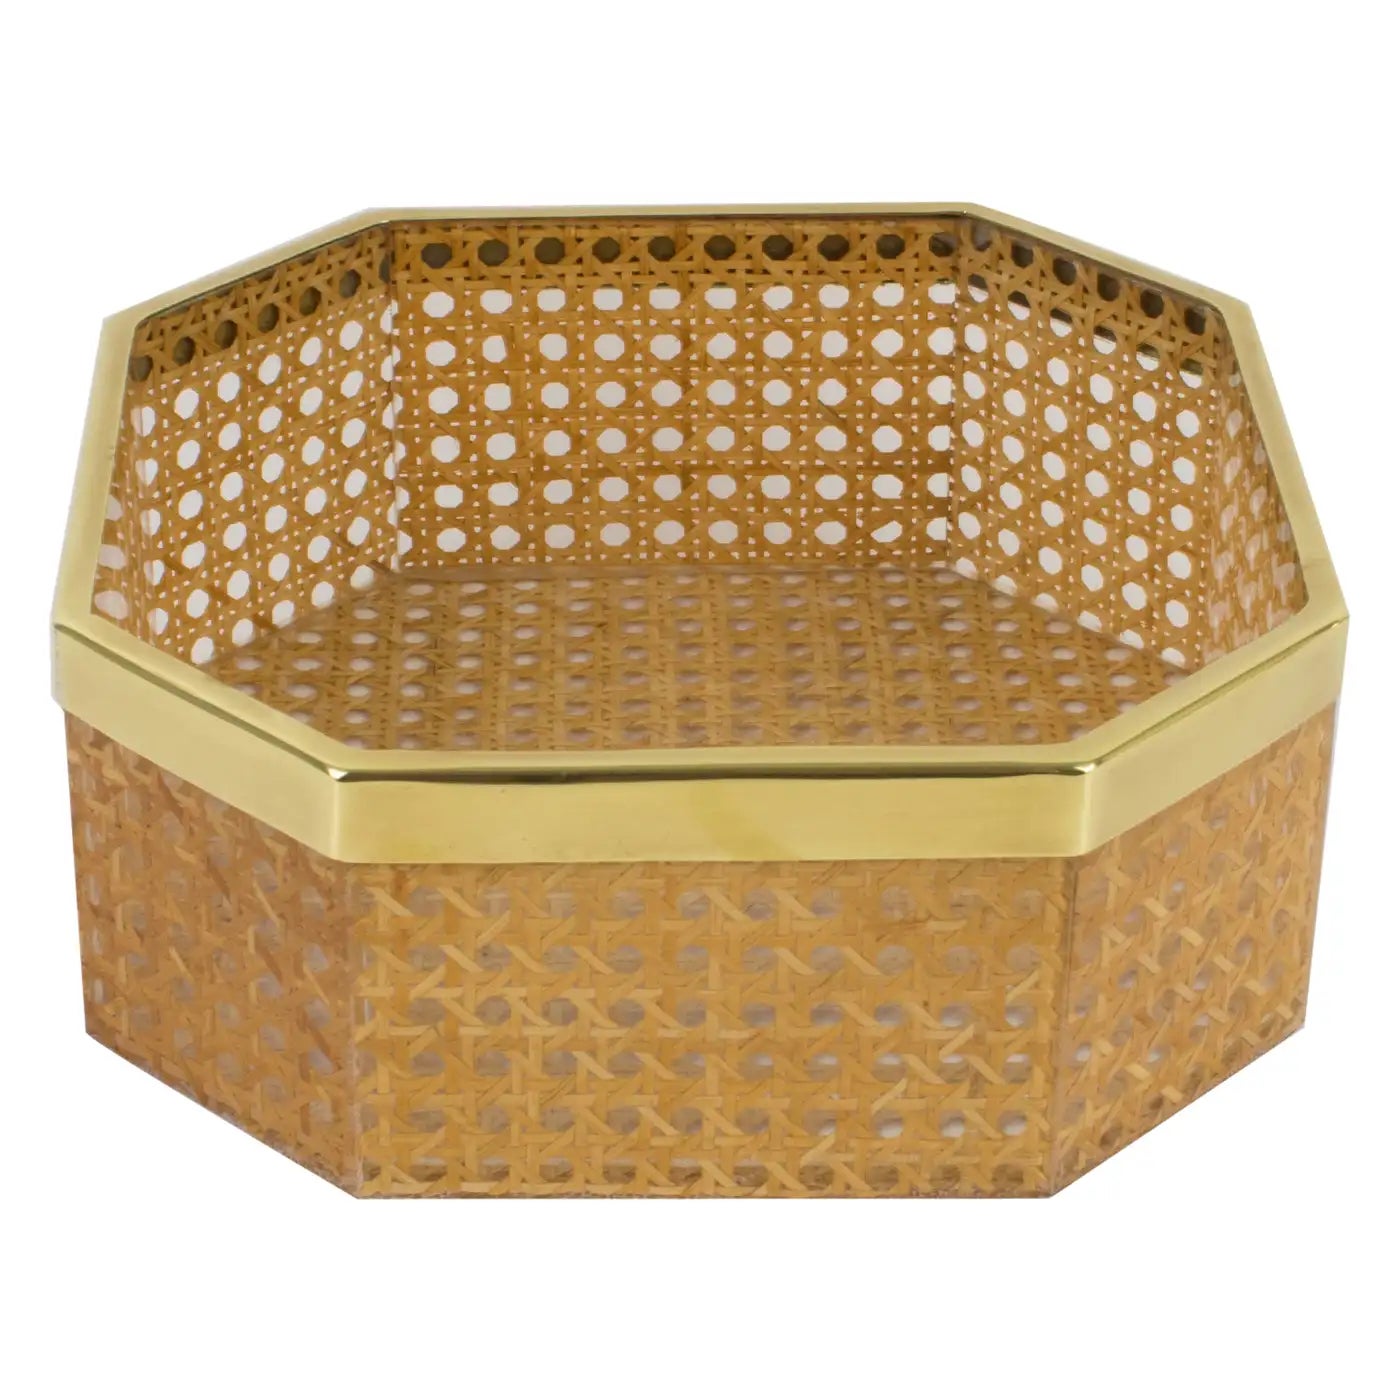 Christian Dior Home Lucite and Rattan Basket Bowl Centerpiece, 1970s For Sale